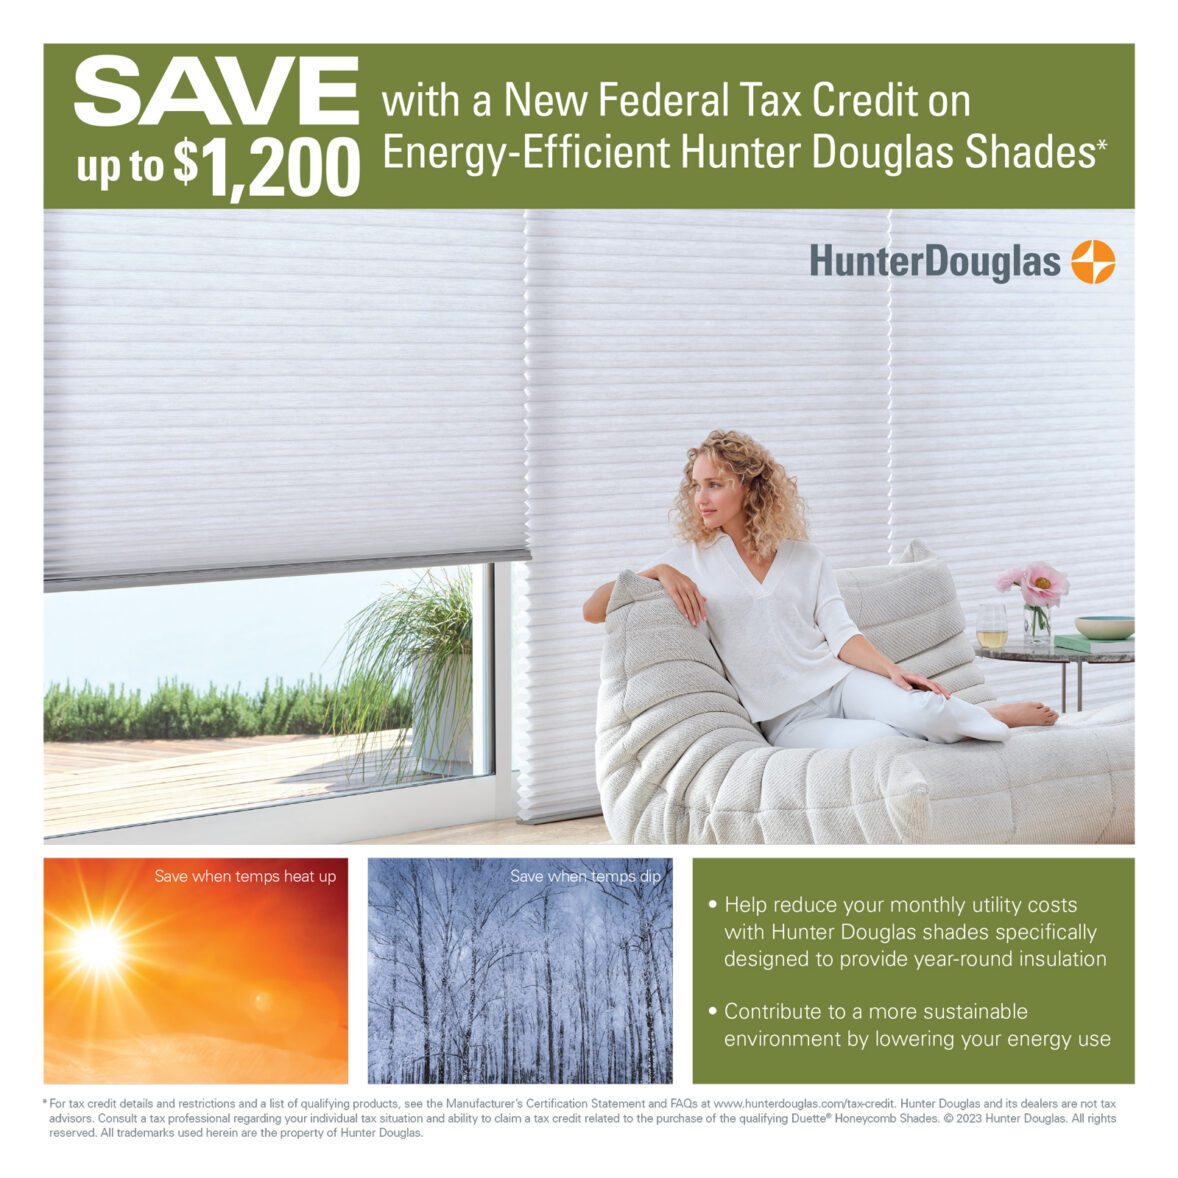 Save $1200 with Federal Tax Credits by installing new Hunter Douglas Energy Efficient Window Coverings